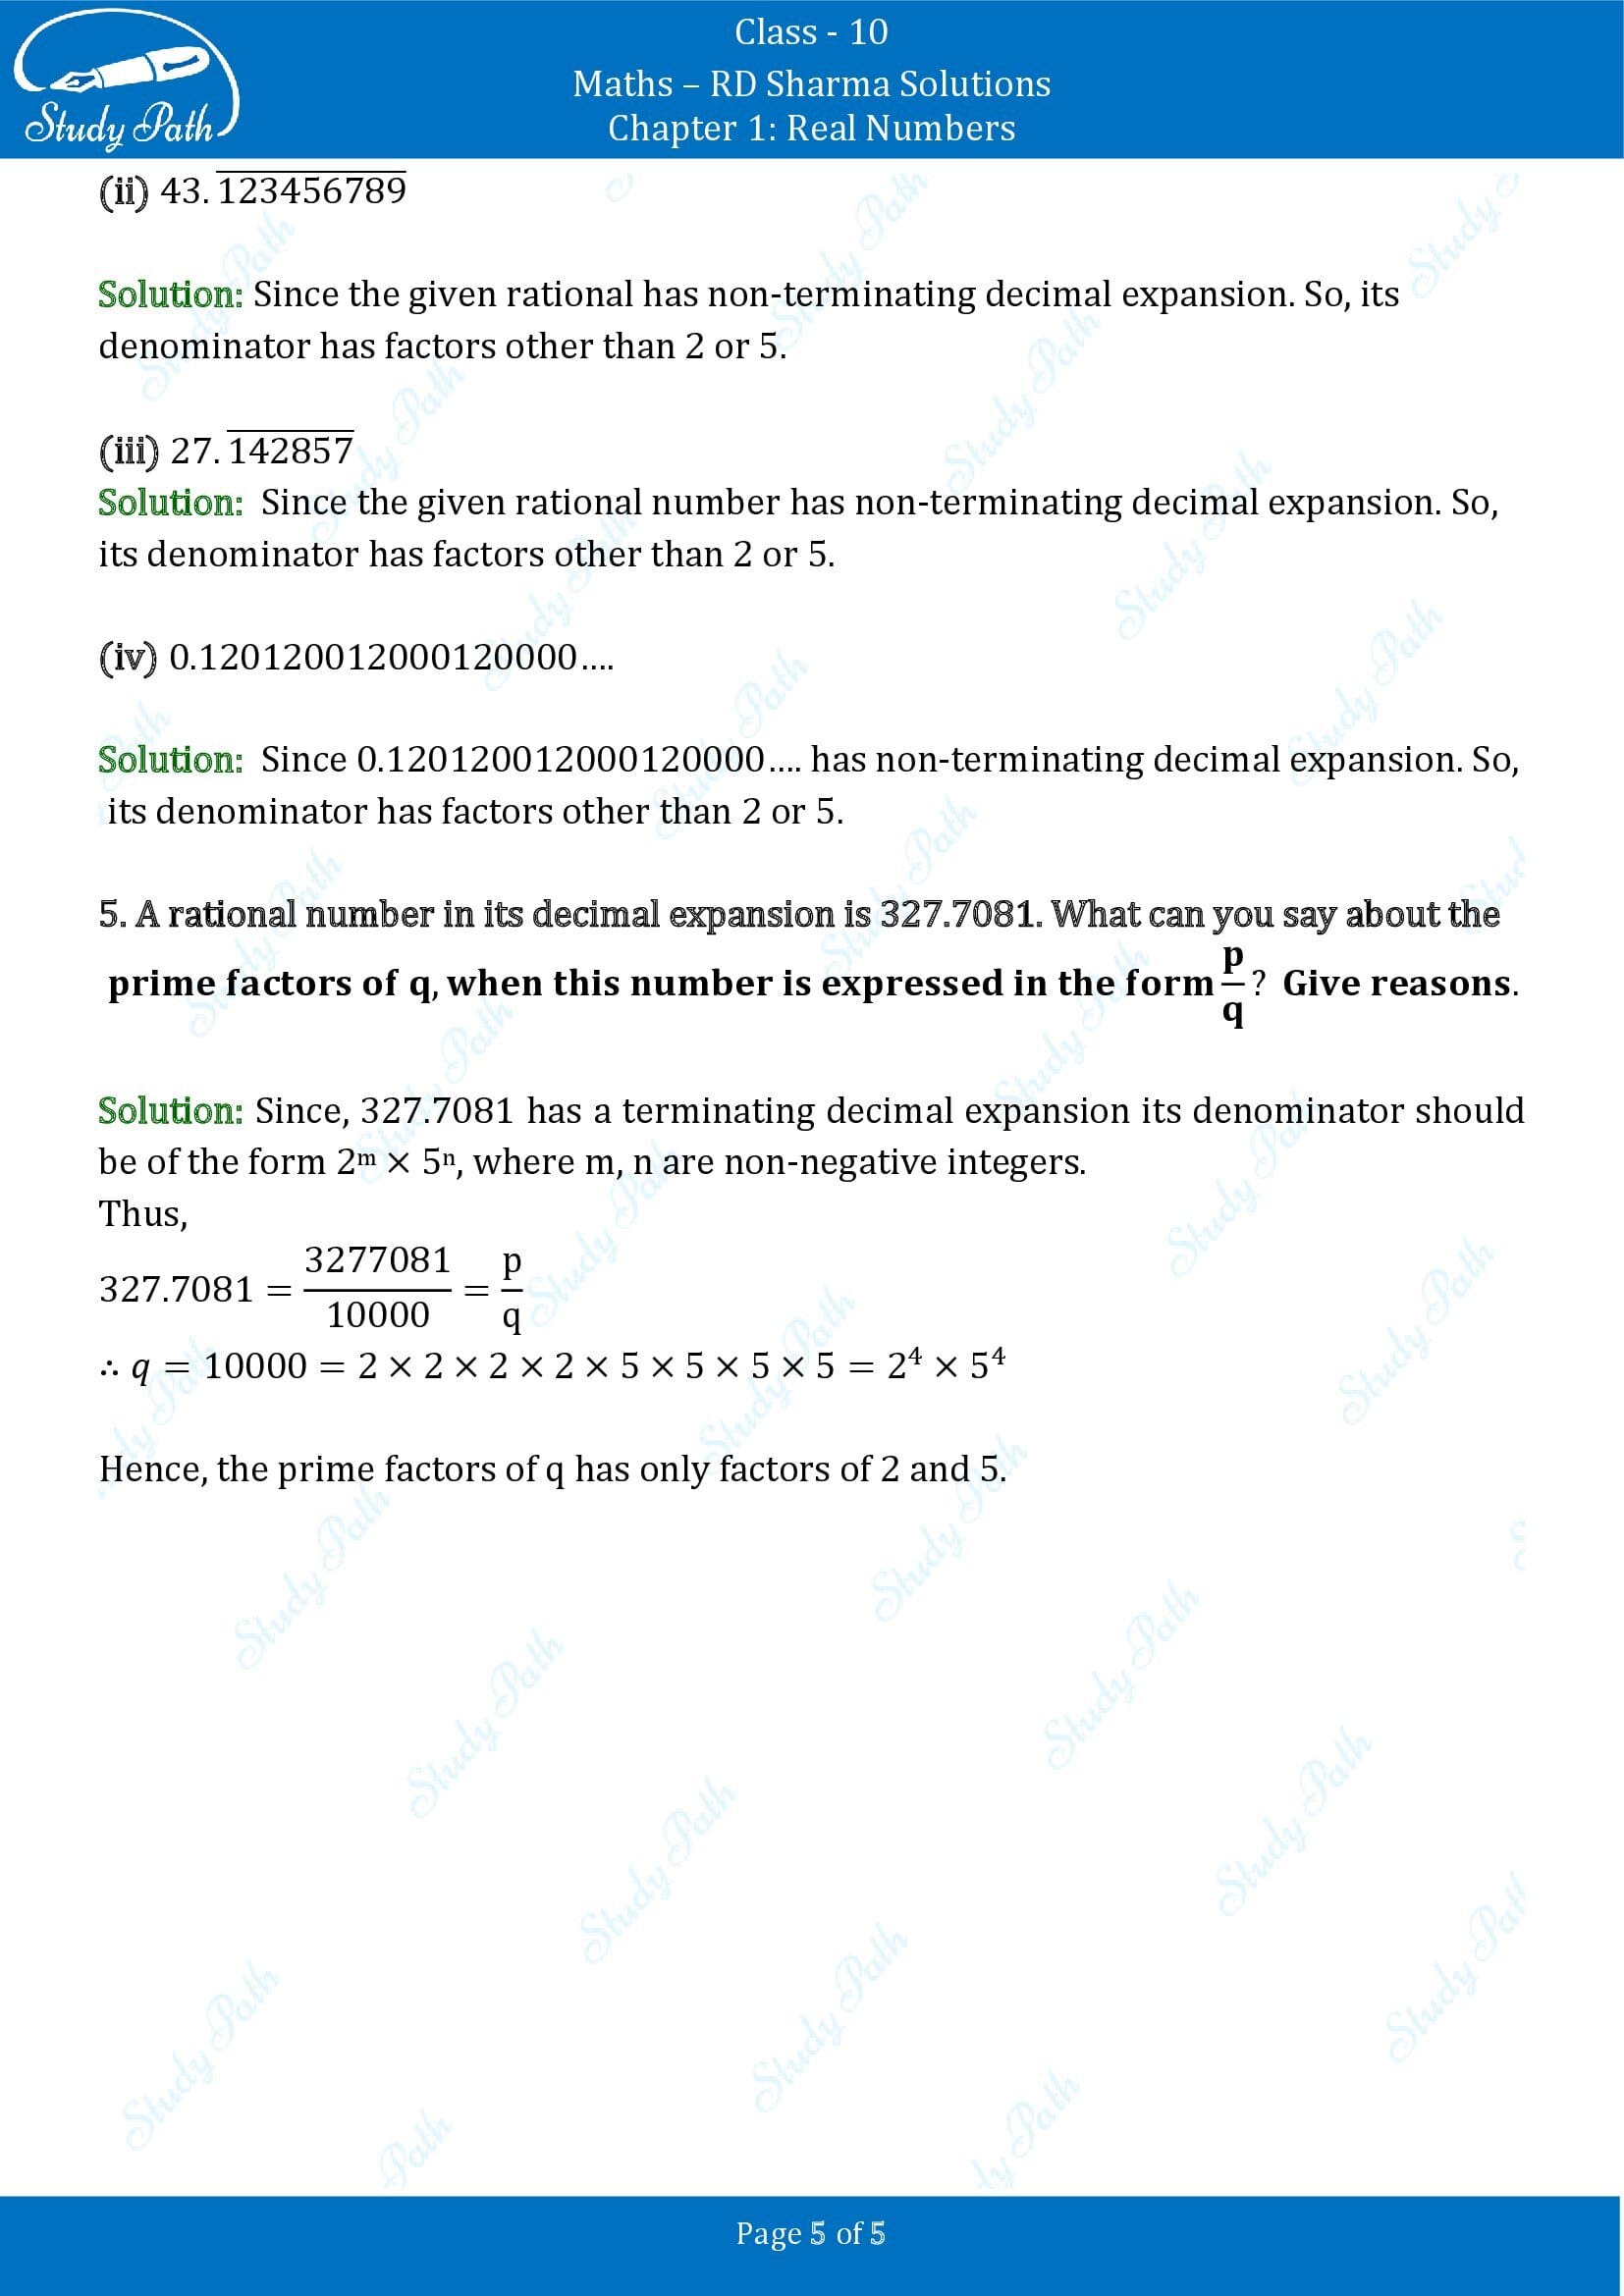 RD Sharma Solutions Class 10 Chapter 1 Real Numbers Exercise 1.6 00005